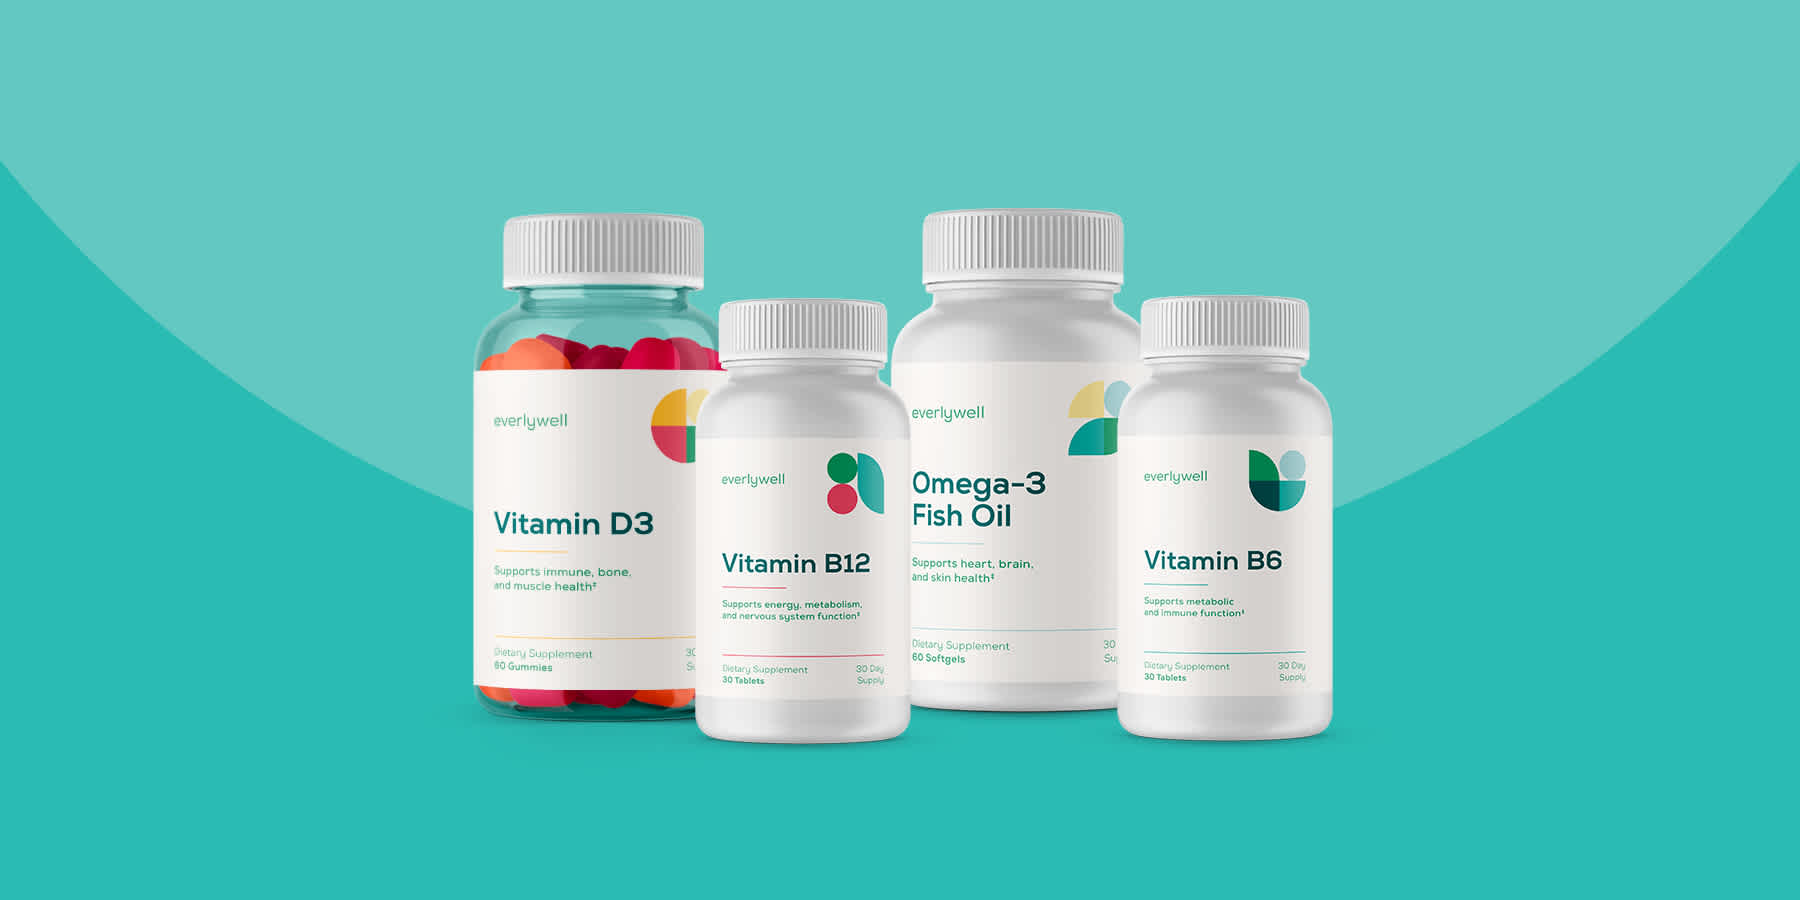 Bottles of Everlywell Vitamins & Supplements that can be taken daily